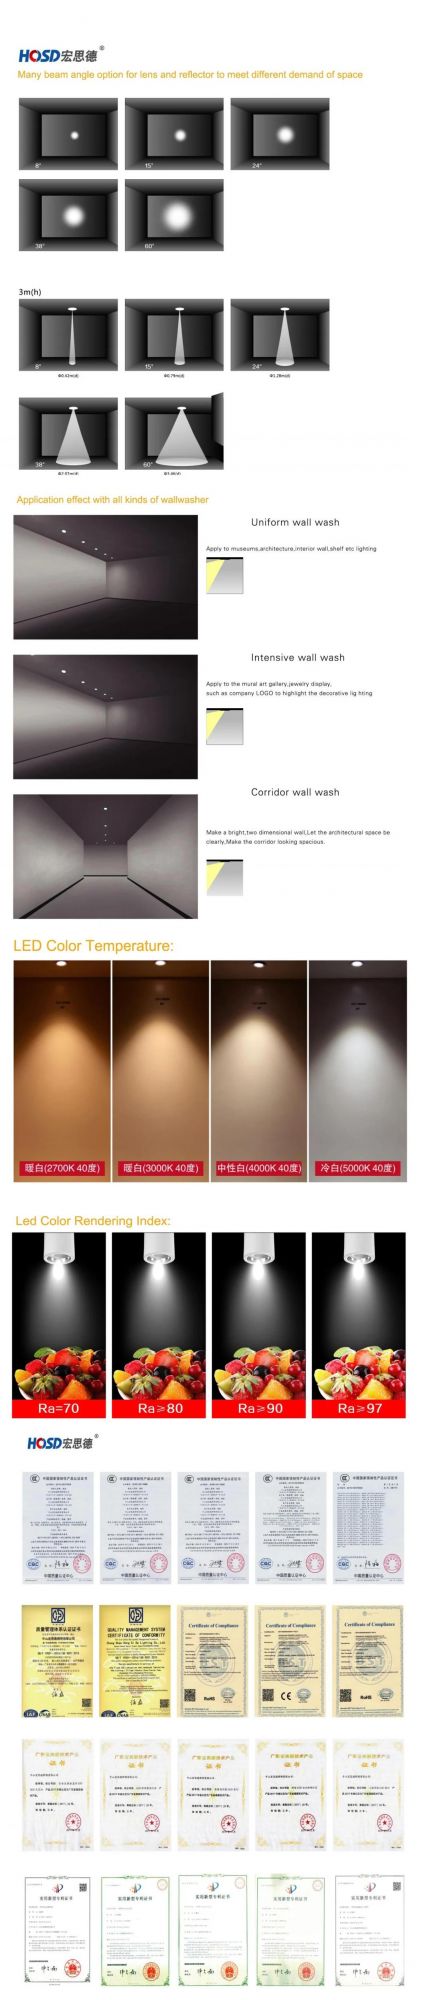 CE 30W Global 3phase Ra>97 LED Spotlight LED Track Light for Commercial Clothes Chain Store Shops Shopping Mall Exhibition Hall